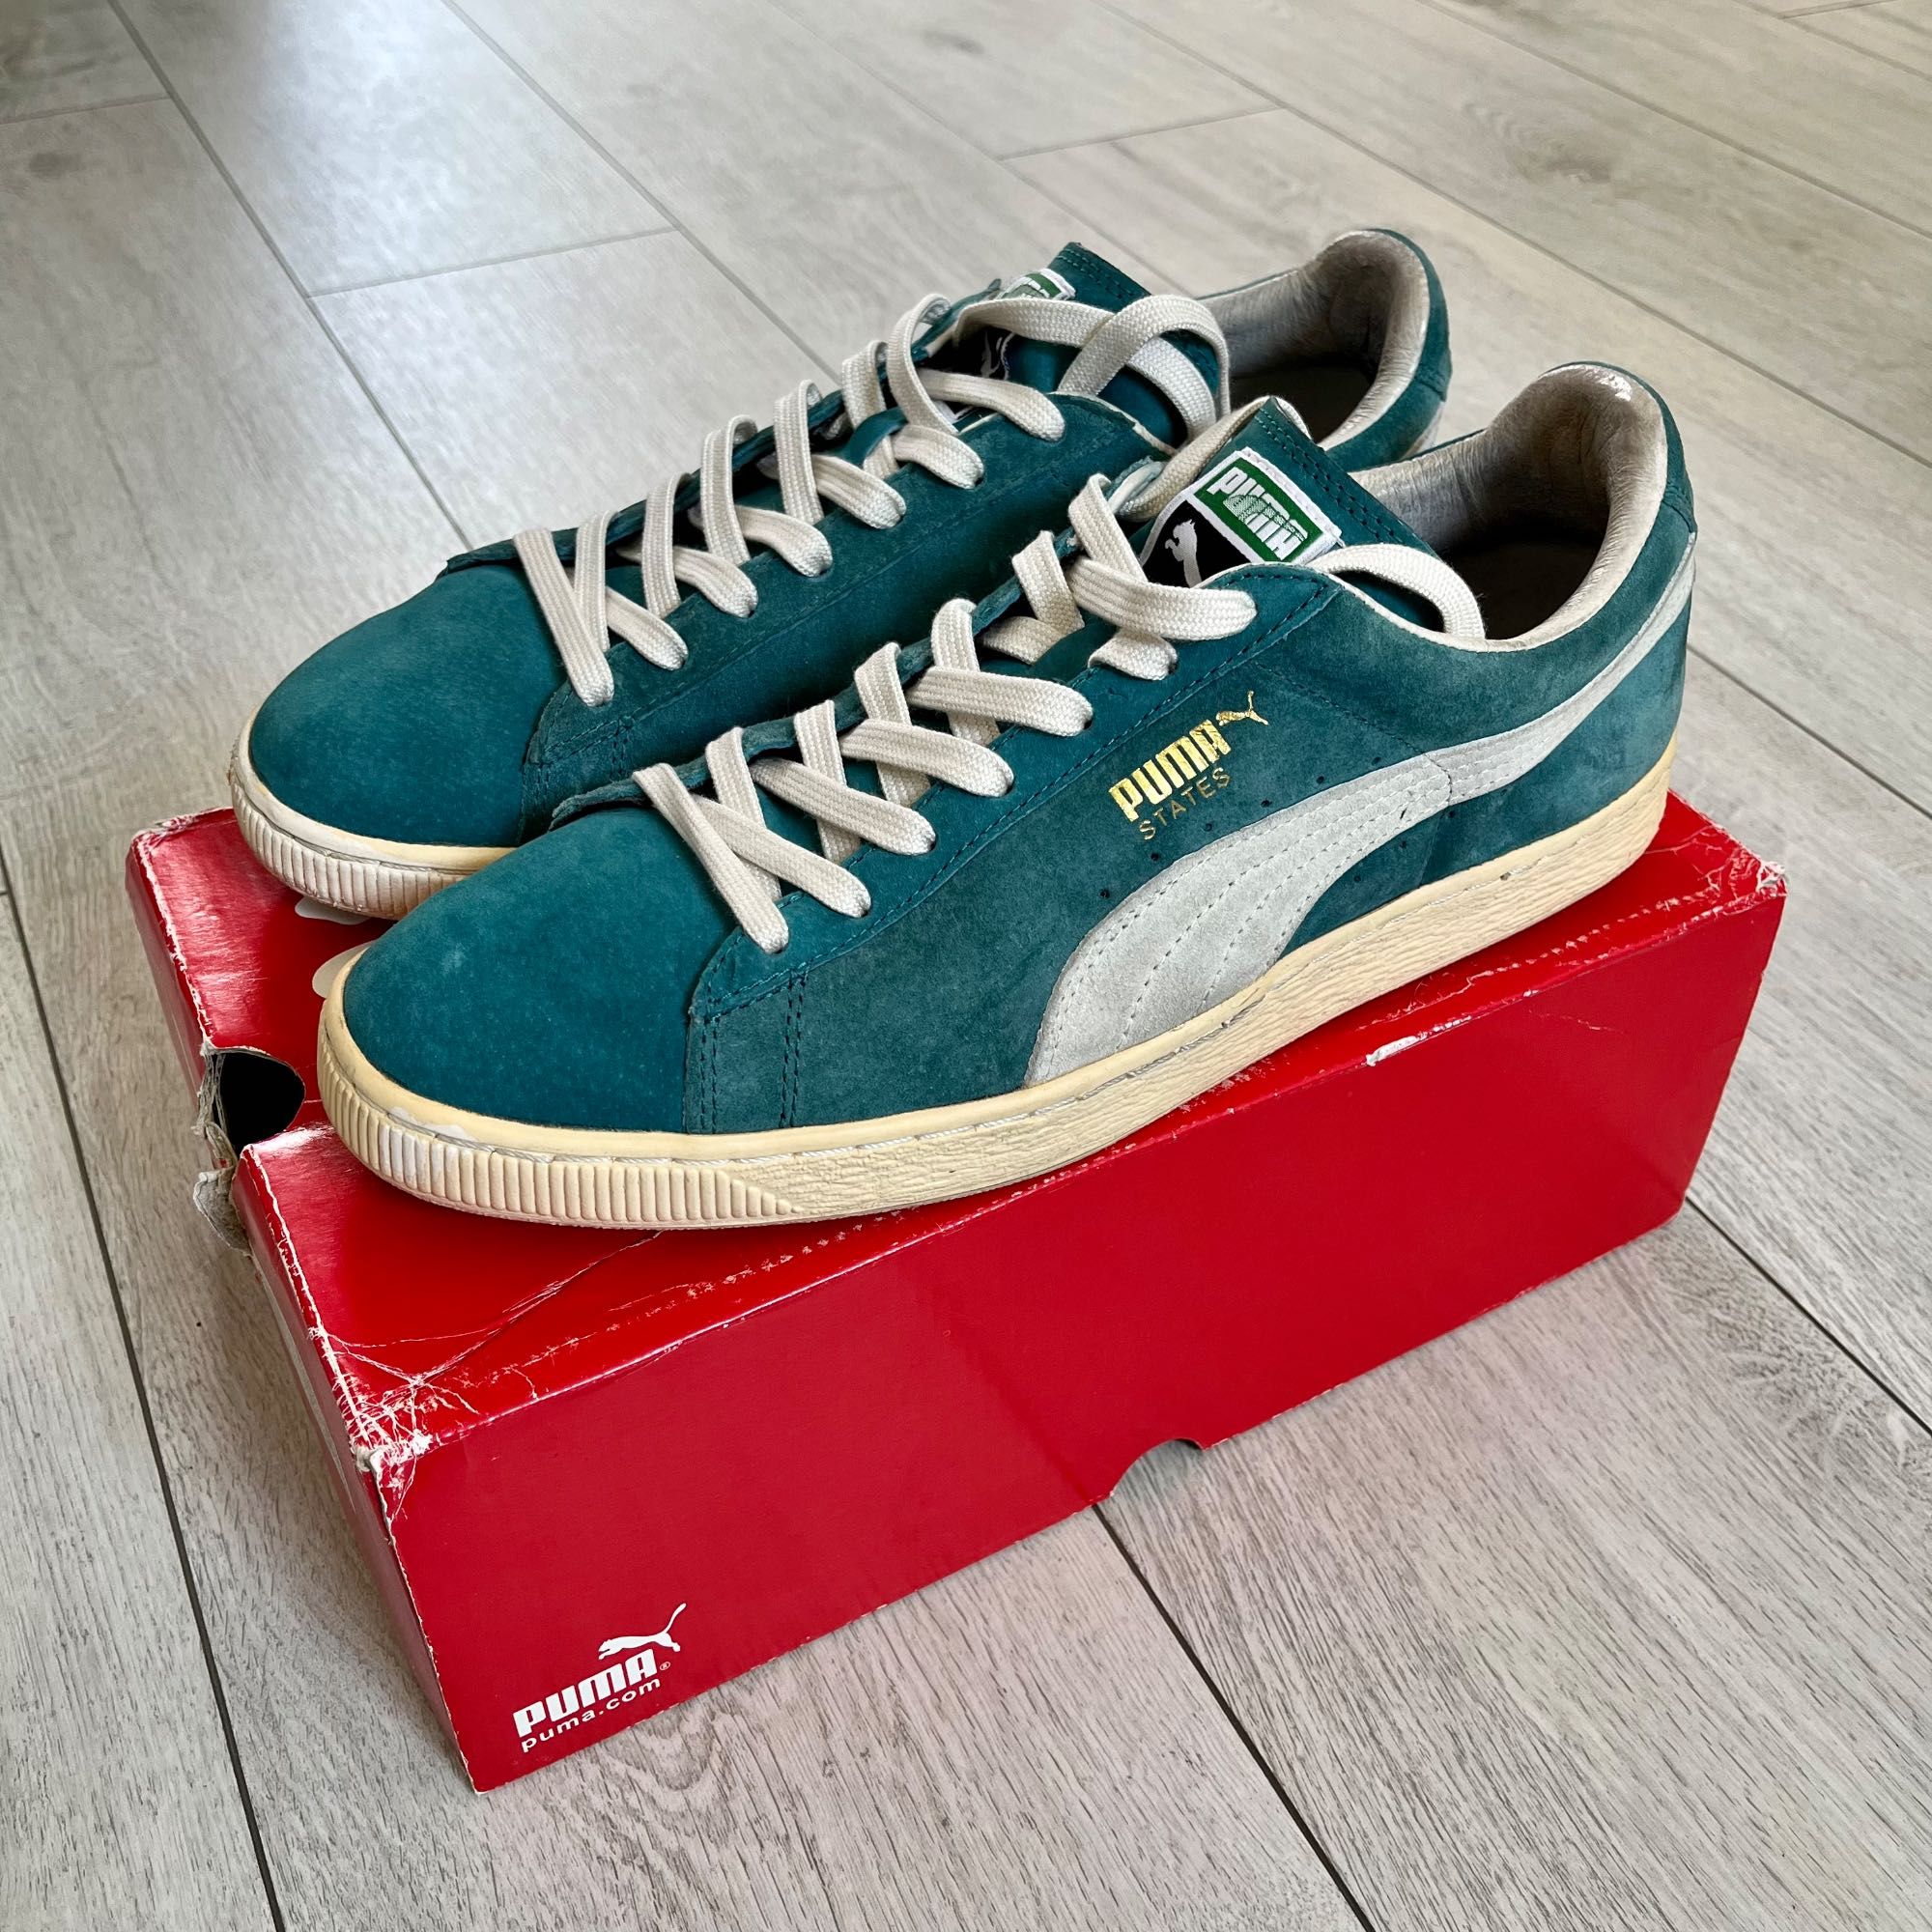 Puma States x Shadow Society Blue Teal Turquoise 11.5 45